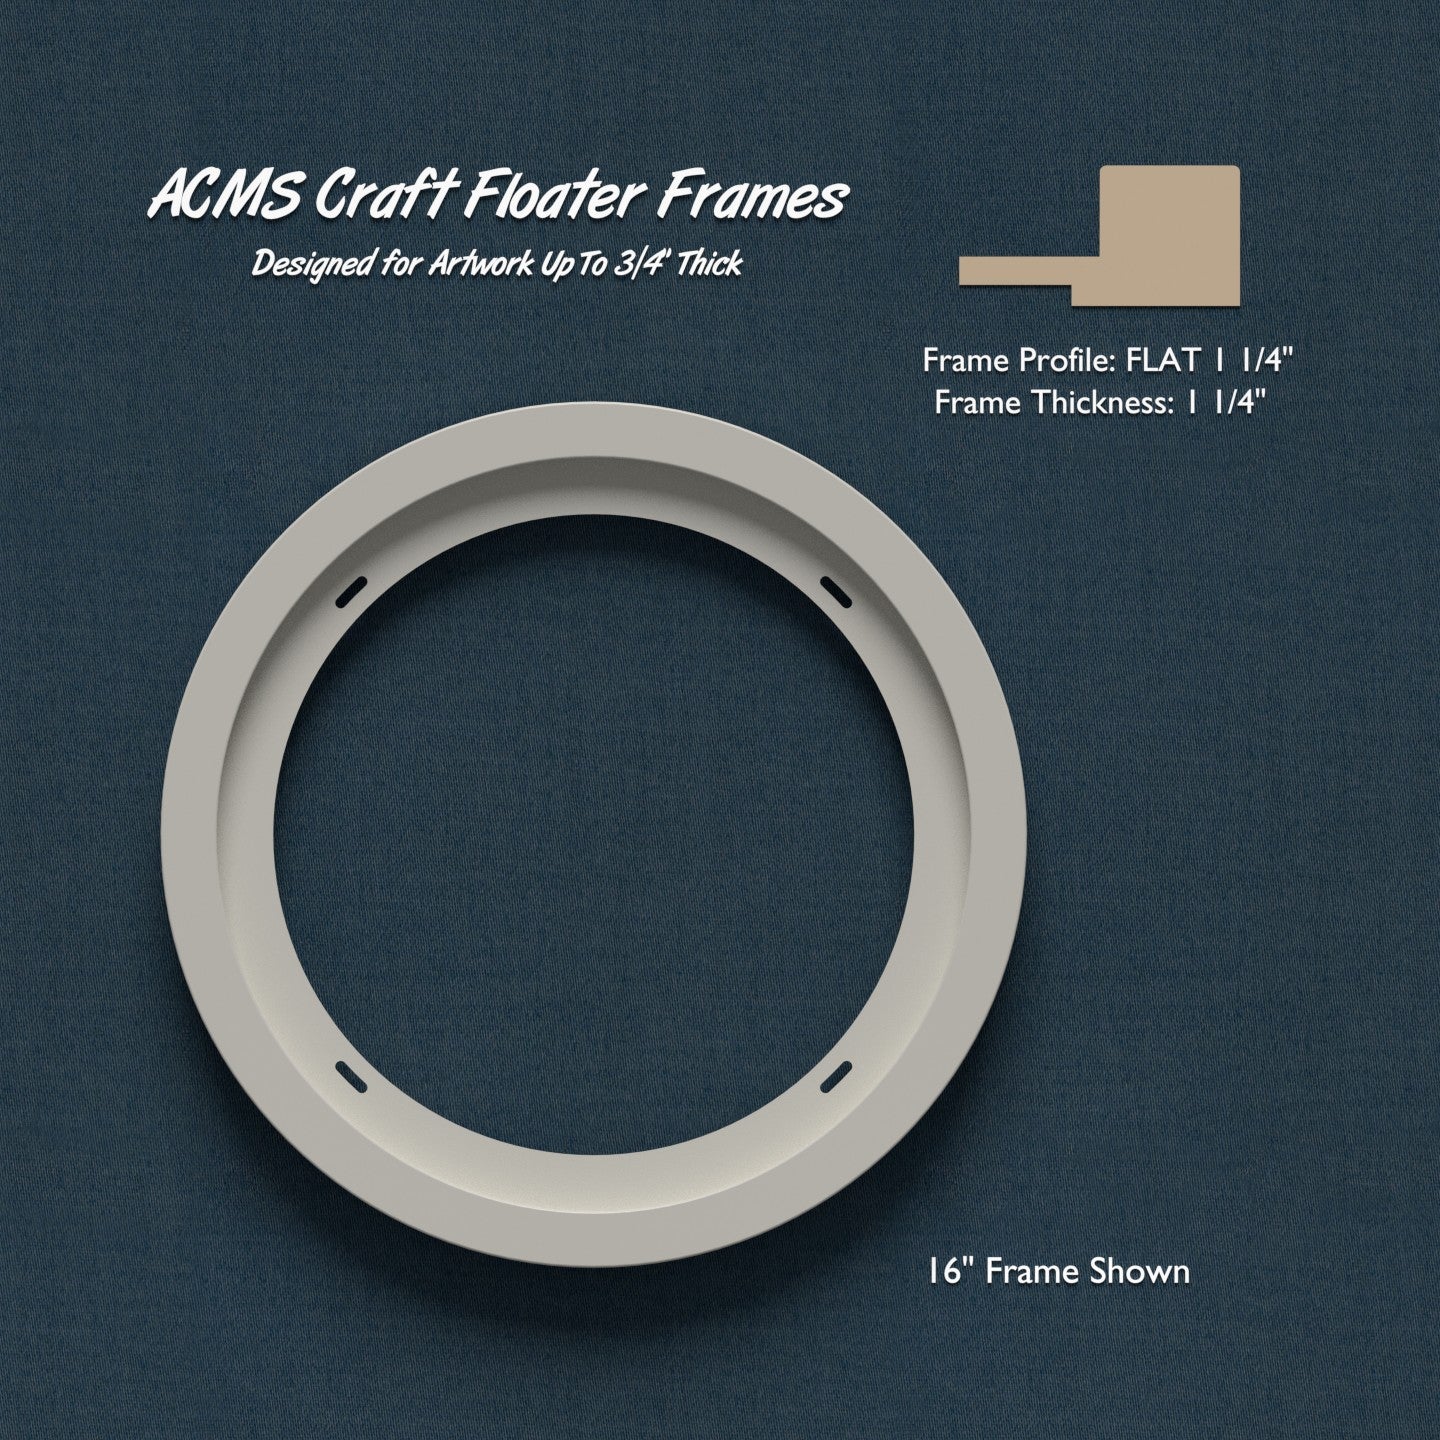 Round Craft Floater Frame - FLAT 1 1/4" Profile - 1 1/4" Thick